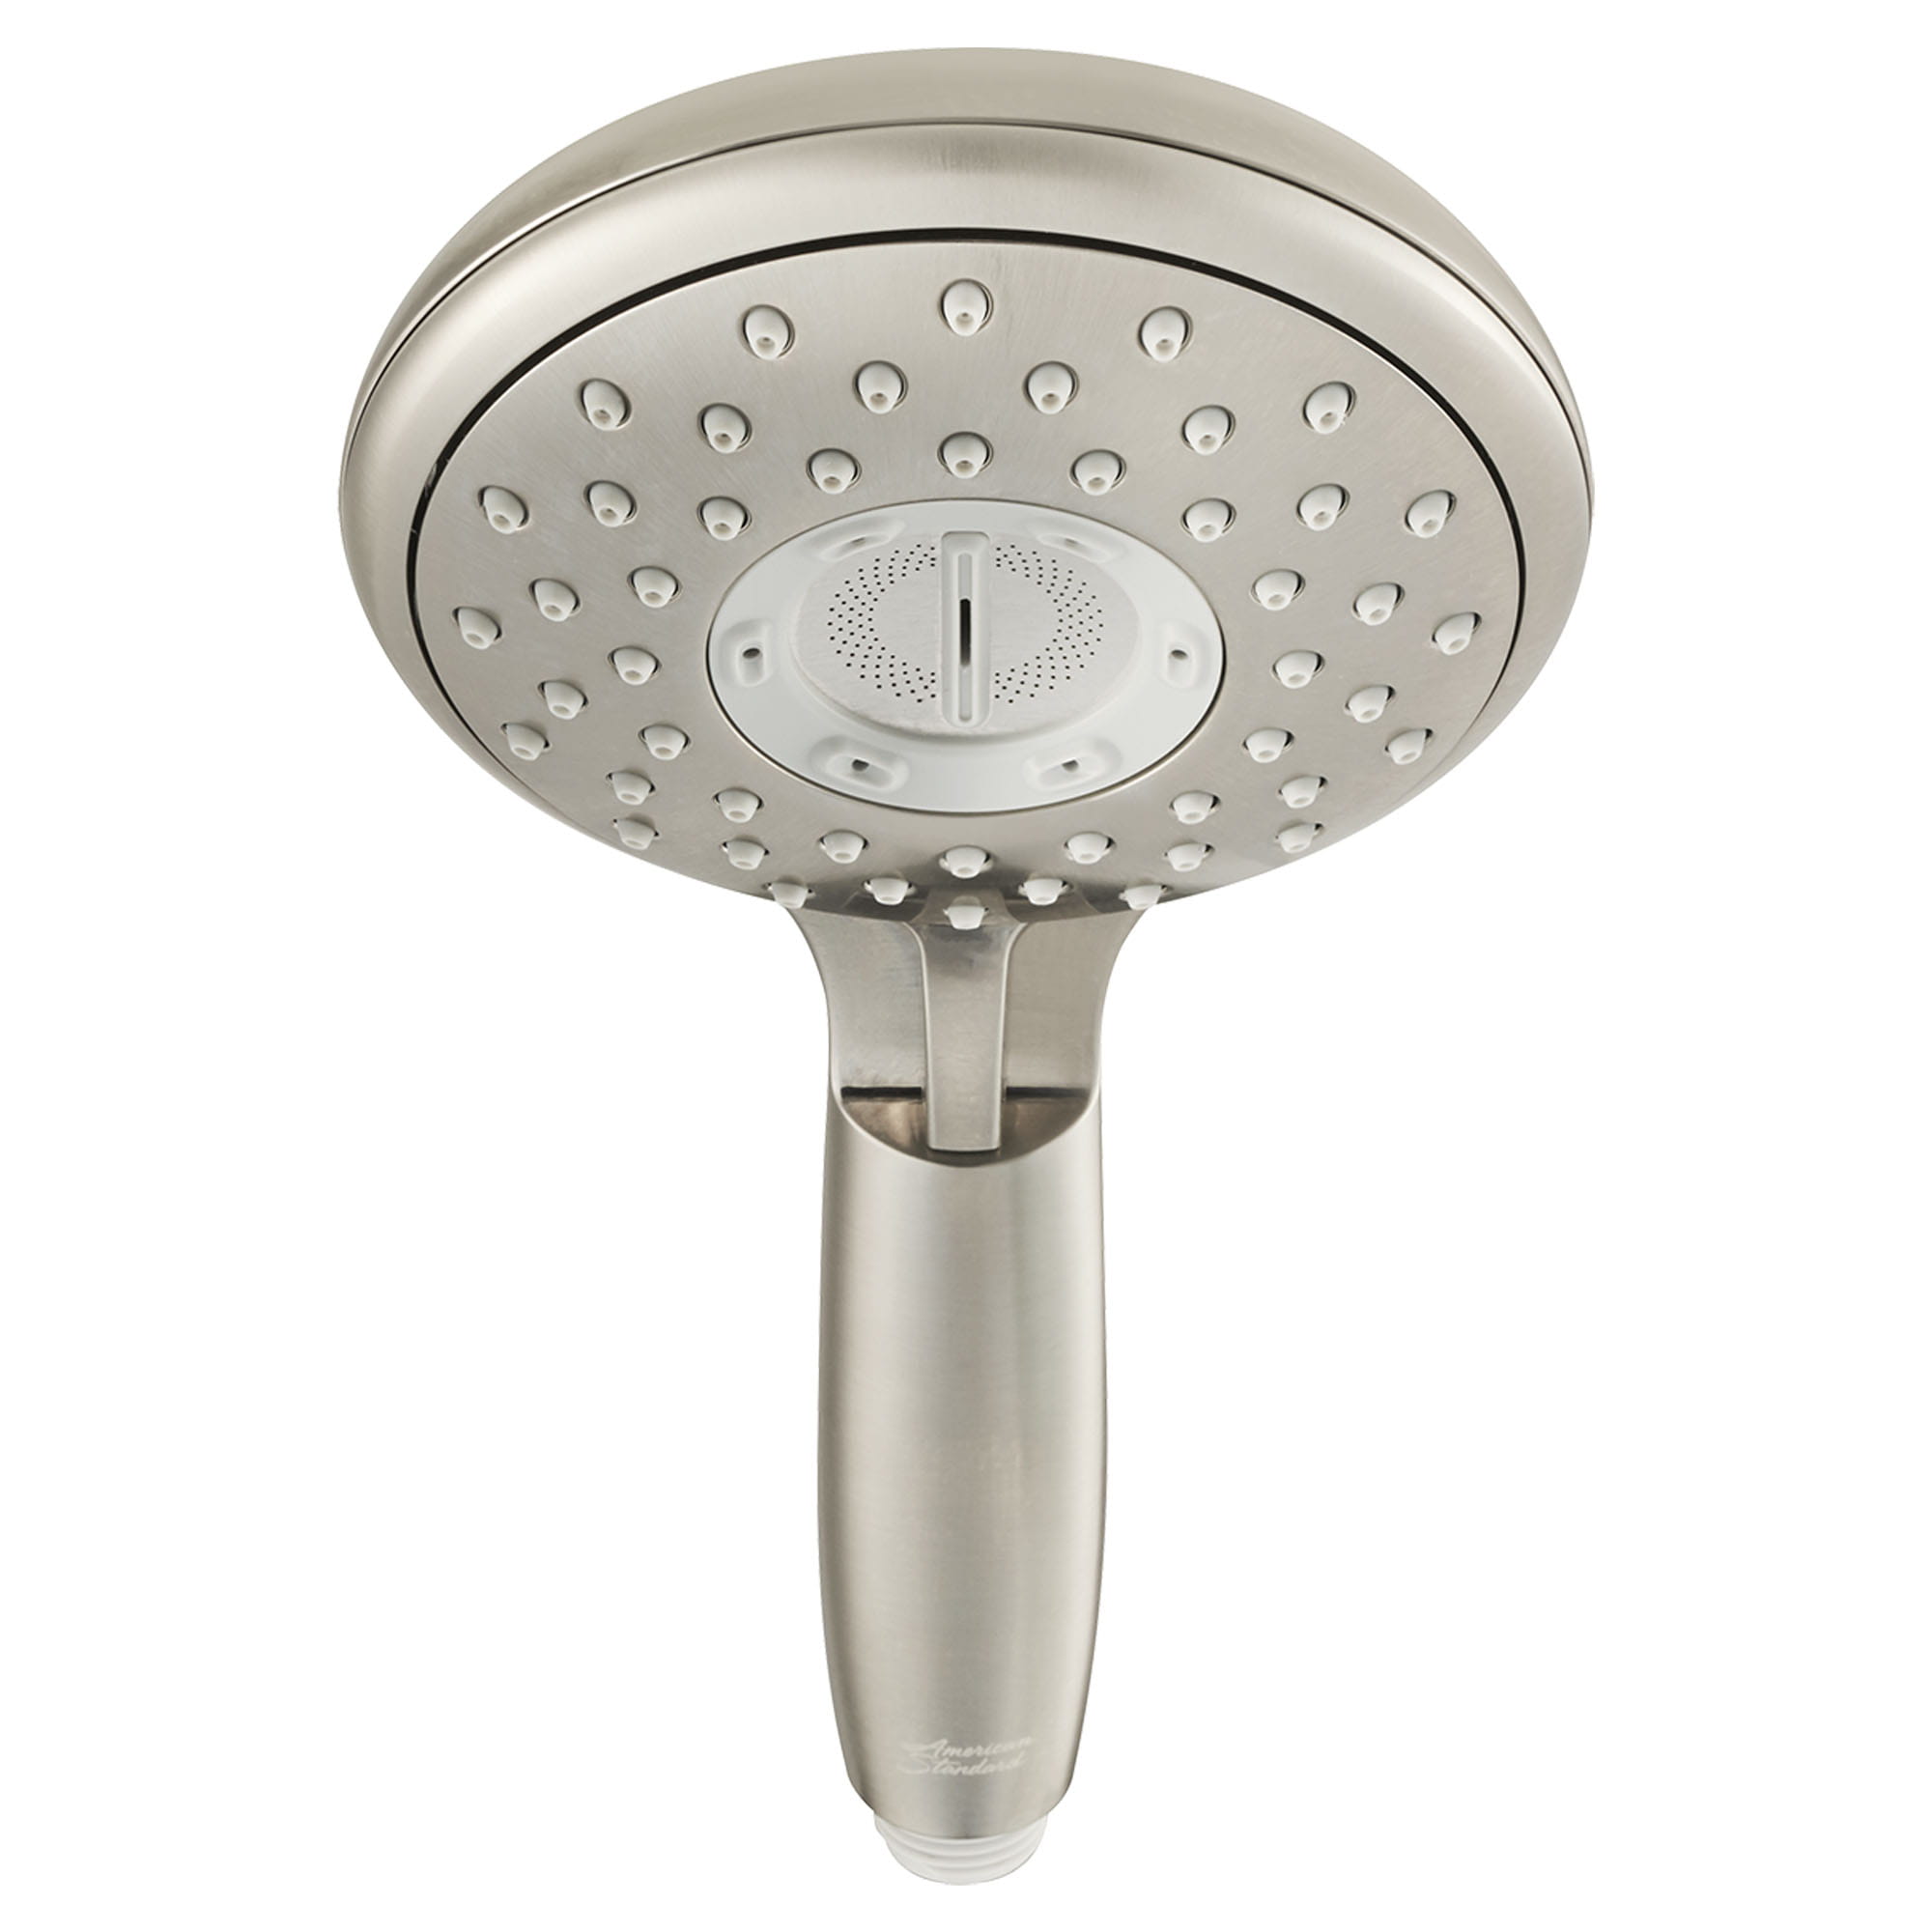 Spectra Handheld 25 gpm 95 L min 5 Inch 4 Function Hand Shower   BRUSHED NICKEL